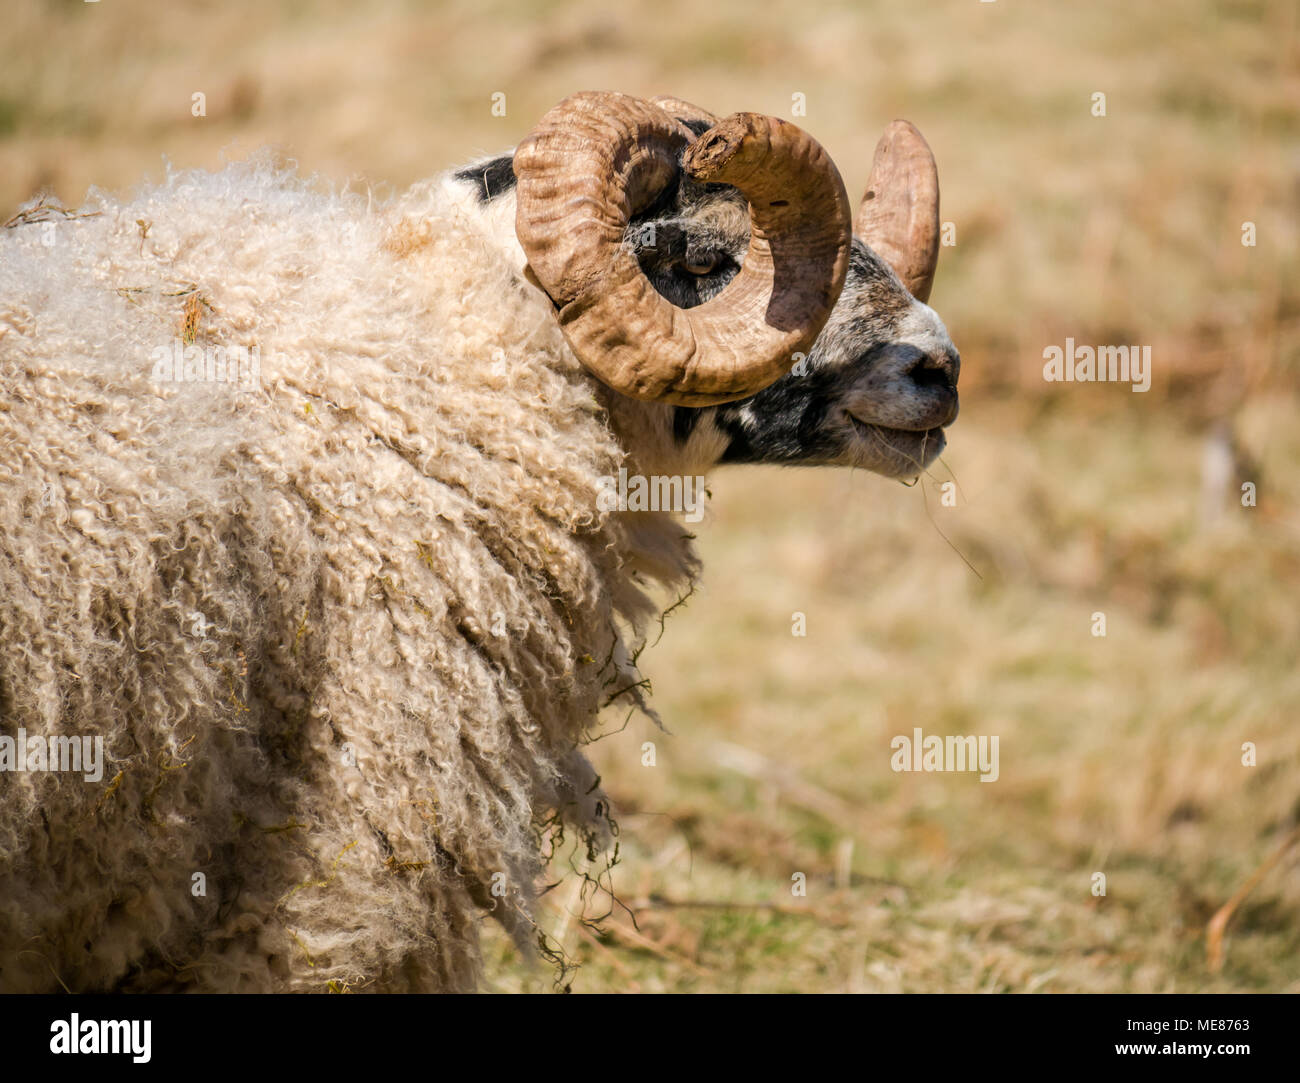 West Linton, Scottish Borders, Scotland, United Kingdom, April 21st 2018.  Spring sunshine in the countryside, with a close up of aScottish blackface ram with curly horns in a field Stock Photo